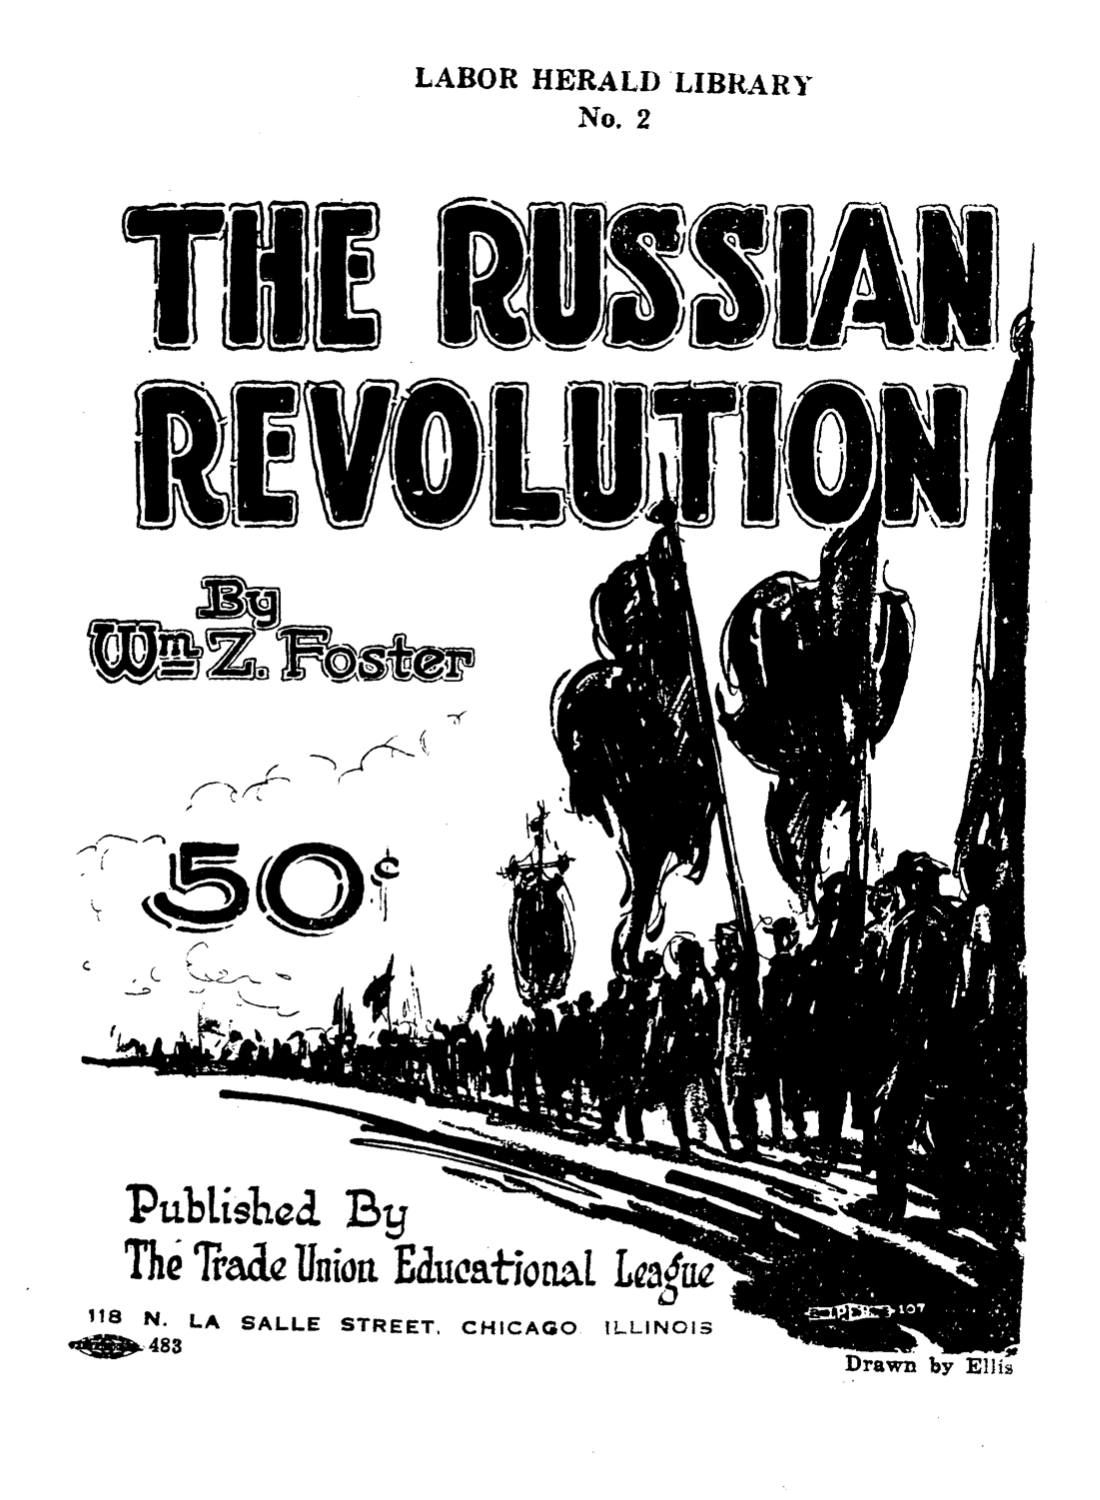 The Russian Revolution By William Z Foster